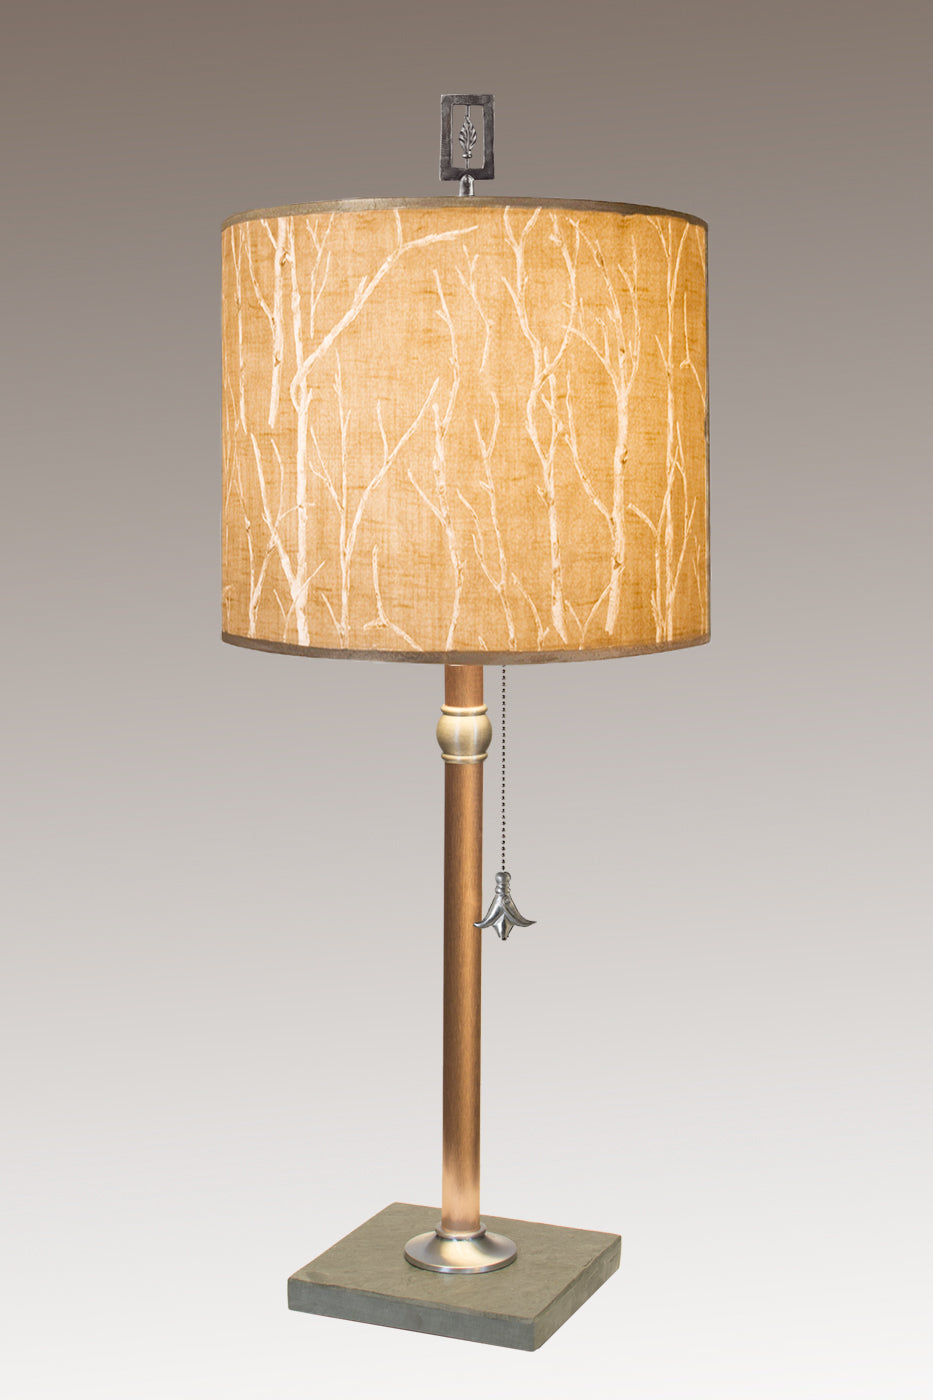 Copper Table Lamp with Medium Drum Shade in Twigs